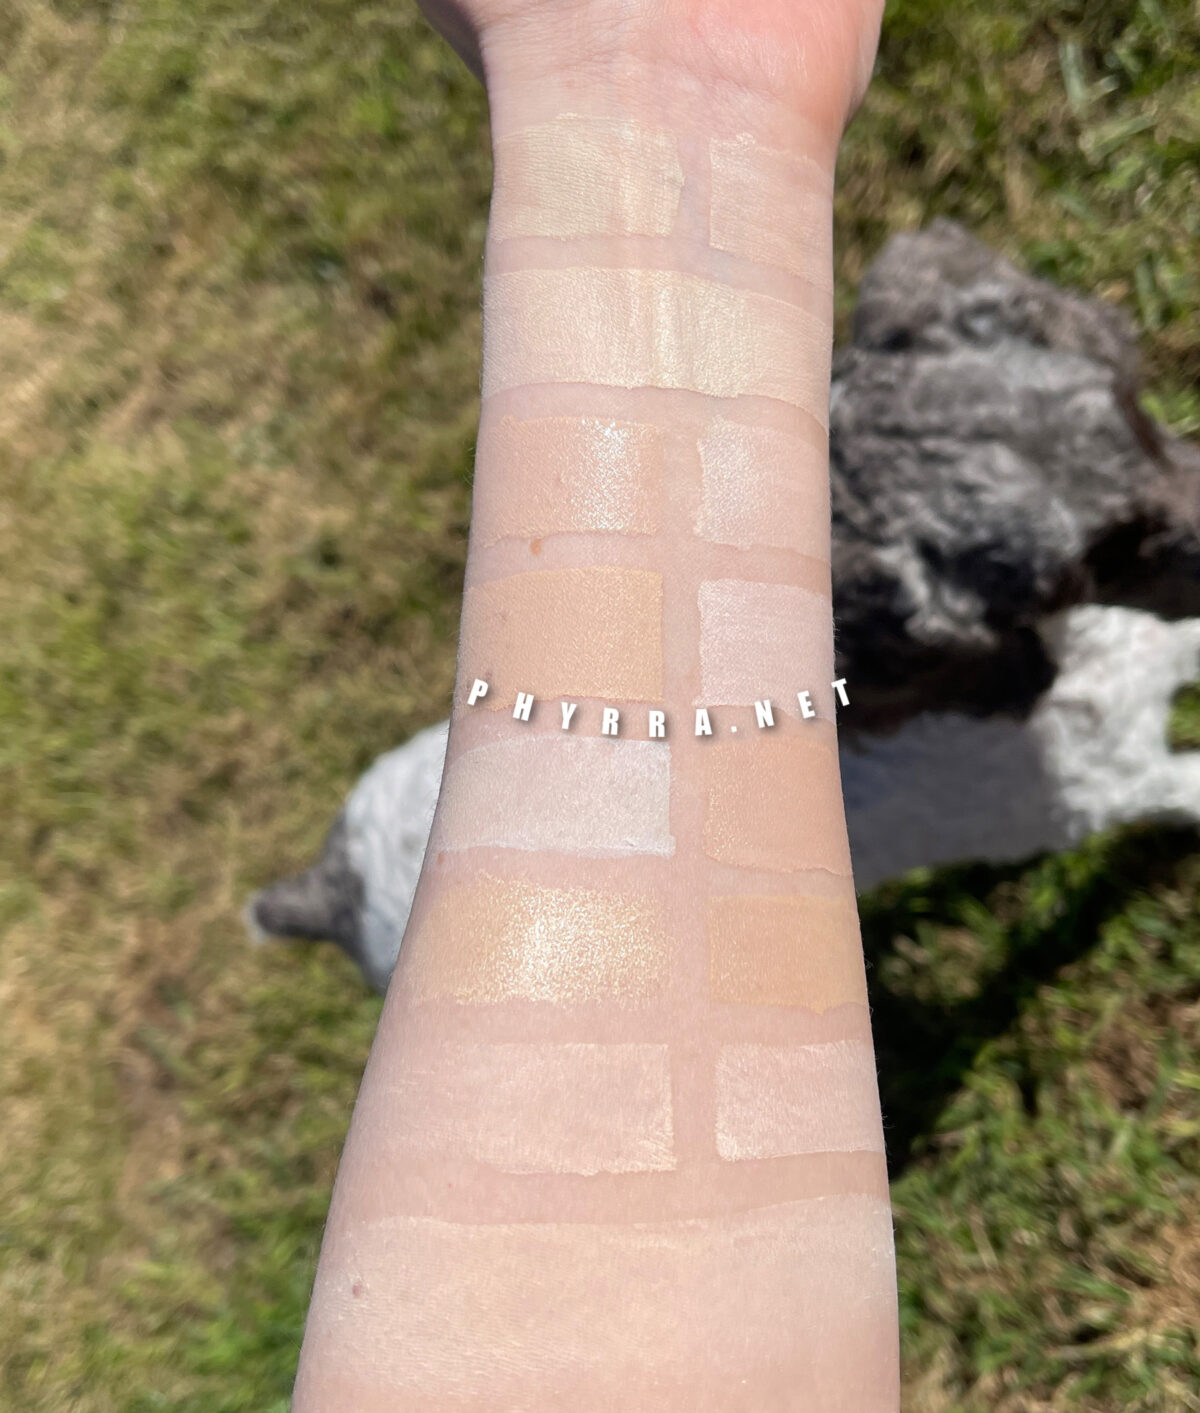 Nyx Blur Foundation in Pale swatch comparisons to other fair foundations on very fair neutral to muted cool yellow skin tone